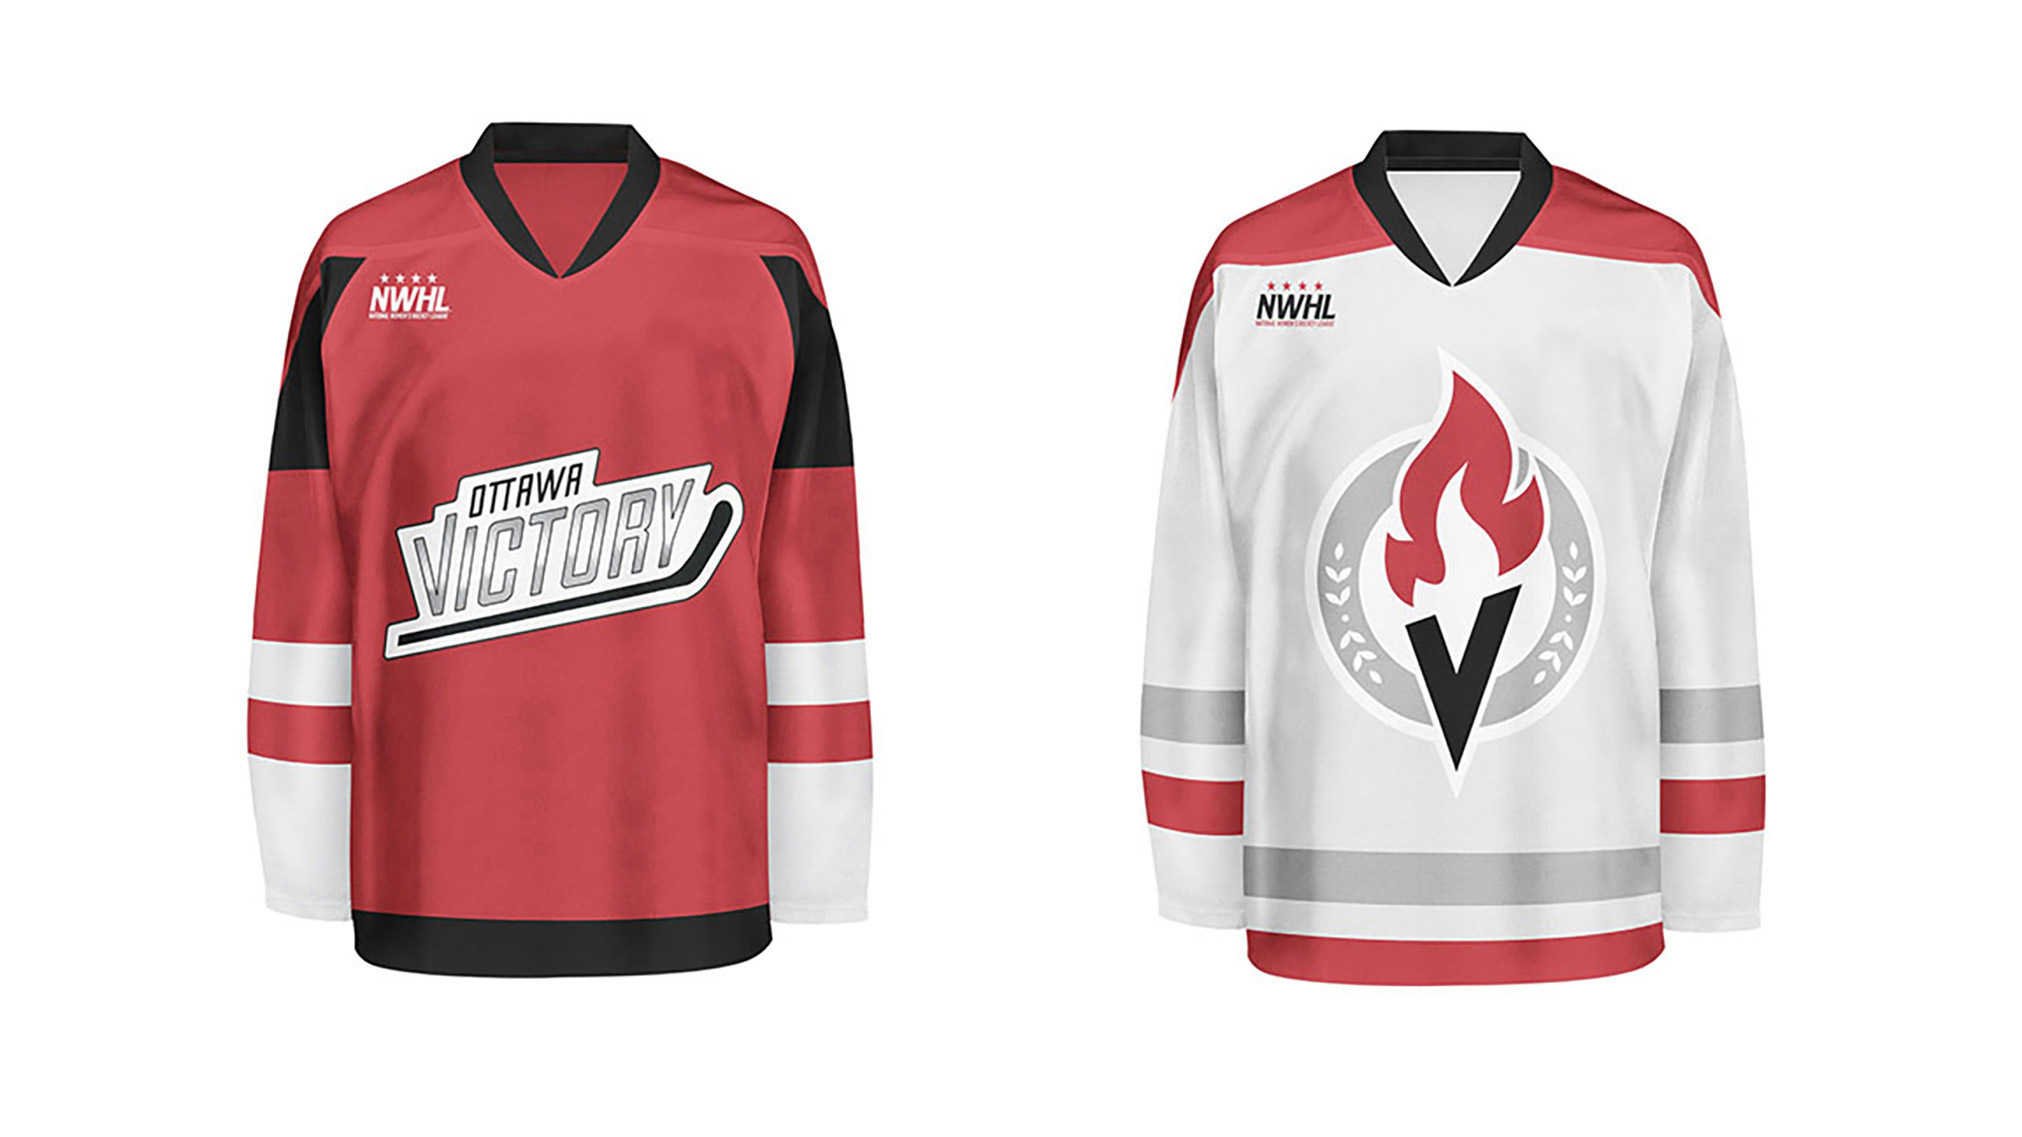 I wanted to combine both my passions for design and hockey and this project entails the branding and logo design for a National Women’s Hockey Team for Ottawa. It includes both jersey and logo designs.
